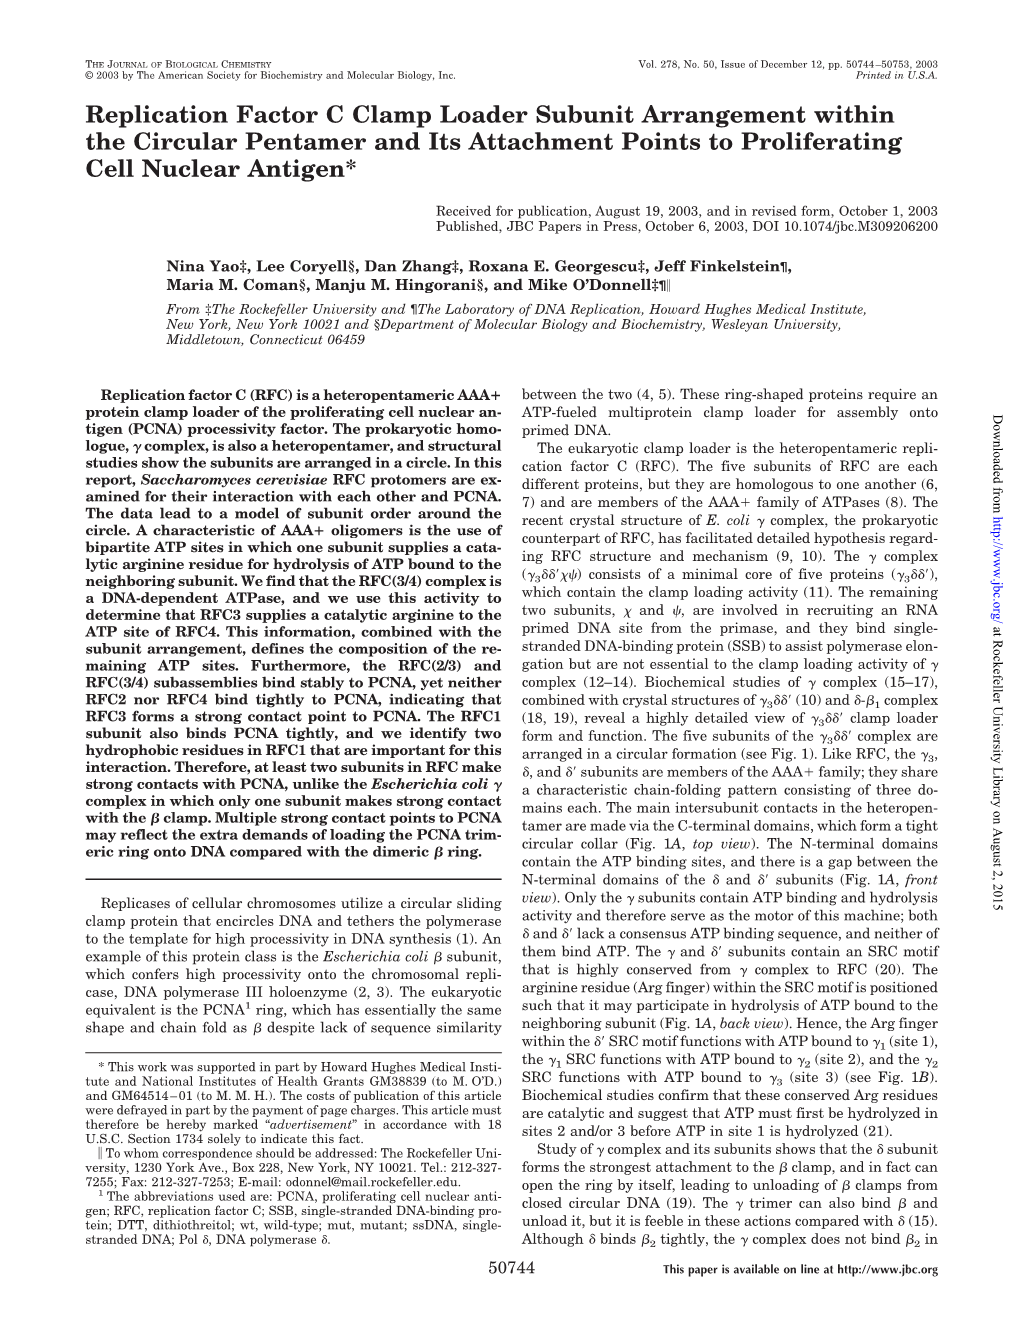 Replication Factor C Clamp Loader Subunit Arrangement Within the Circular Pentamer and Its Attachment Points to Proliferating Cell Nuclear Antigen*